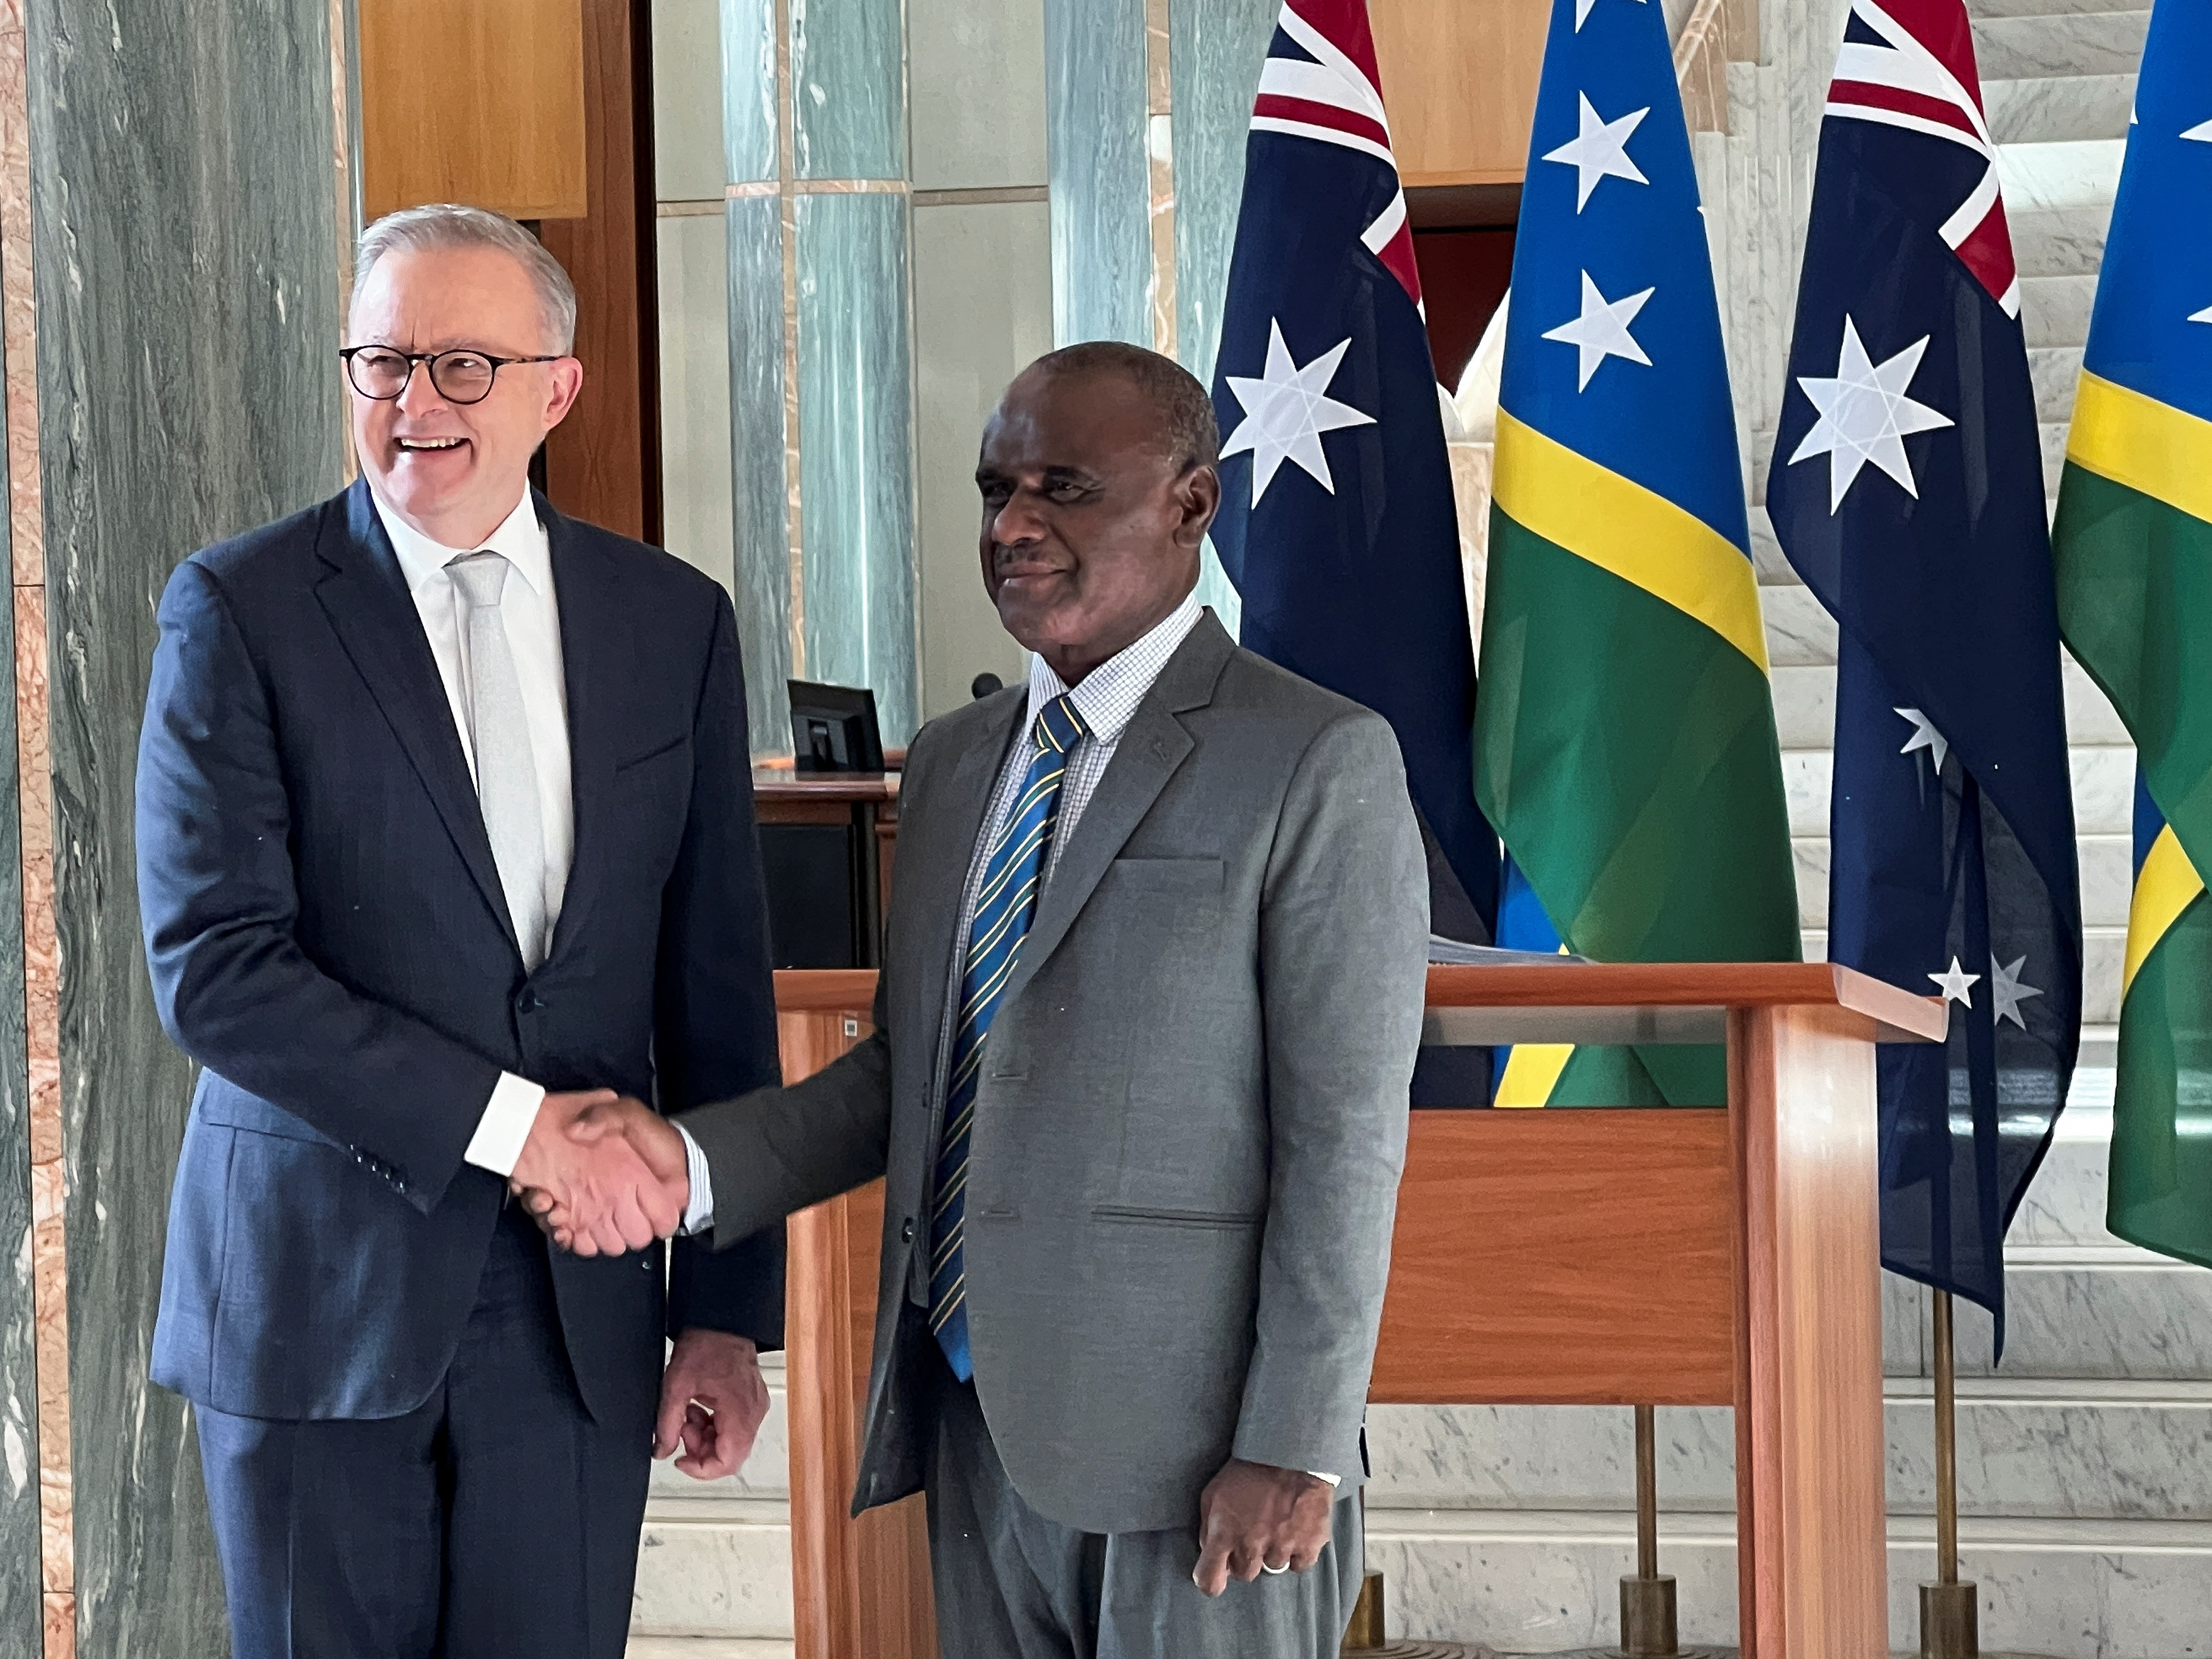 Solomon Islands Prime Minister Jeremiah Manele shakes hands with Australia Prime Minister Anthony Albanese in Australia’s national parliament in Canberra